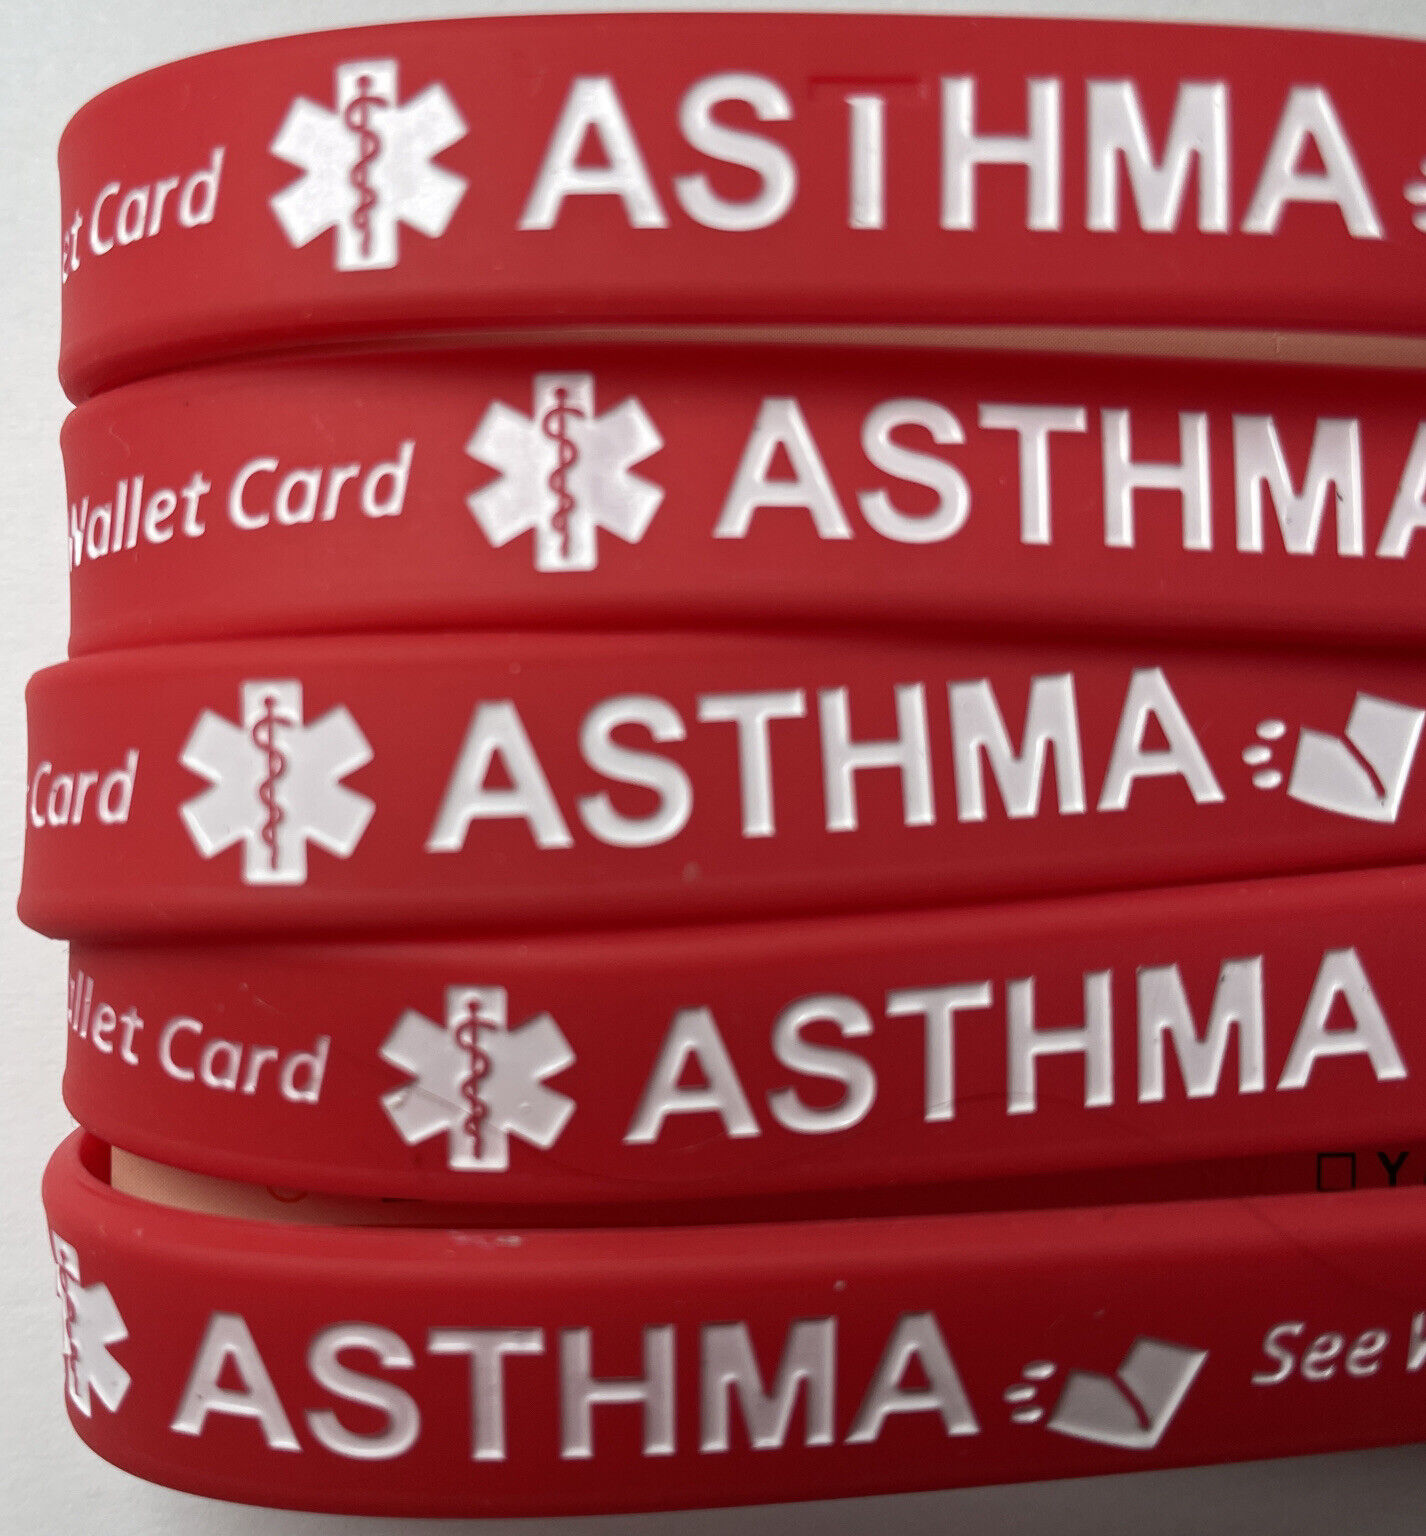 Asthma Alert Silicone Wristband Bracelets 5 Red Medical Condition with Info Card Warp united Does Not Apply - фотография #5